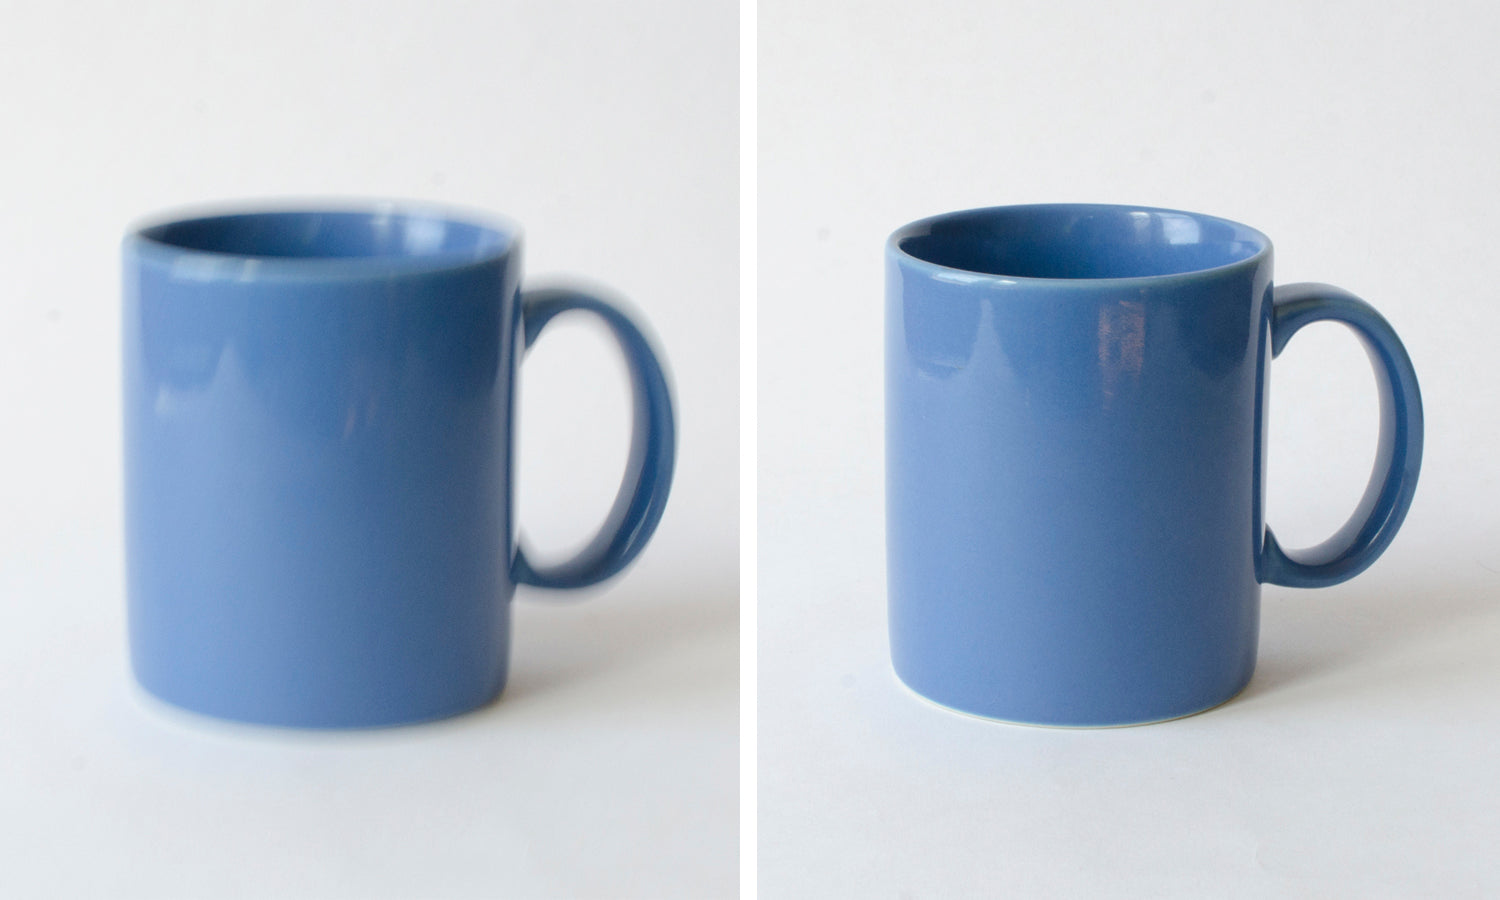 Two ecommerce photos of a coffee mug. One is heavily blurred and the other is not.